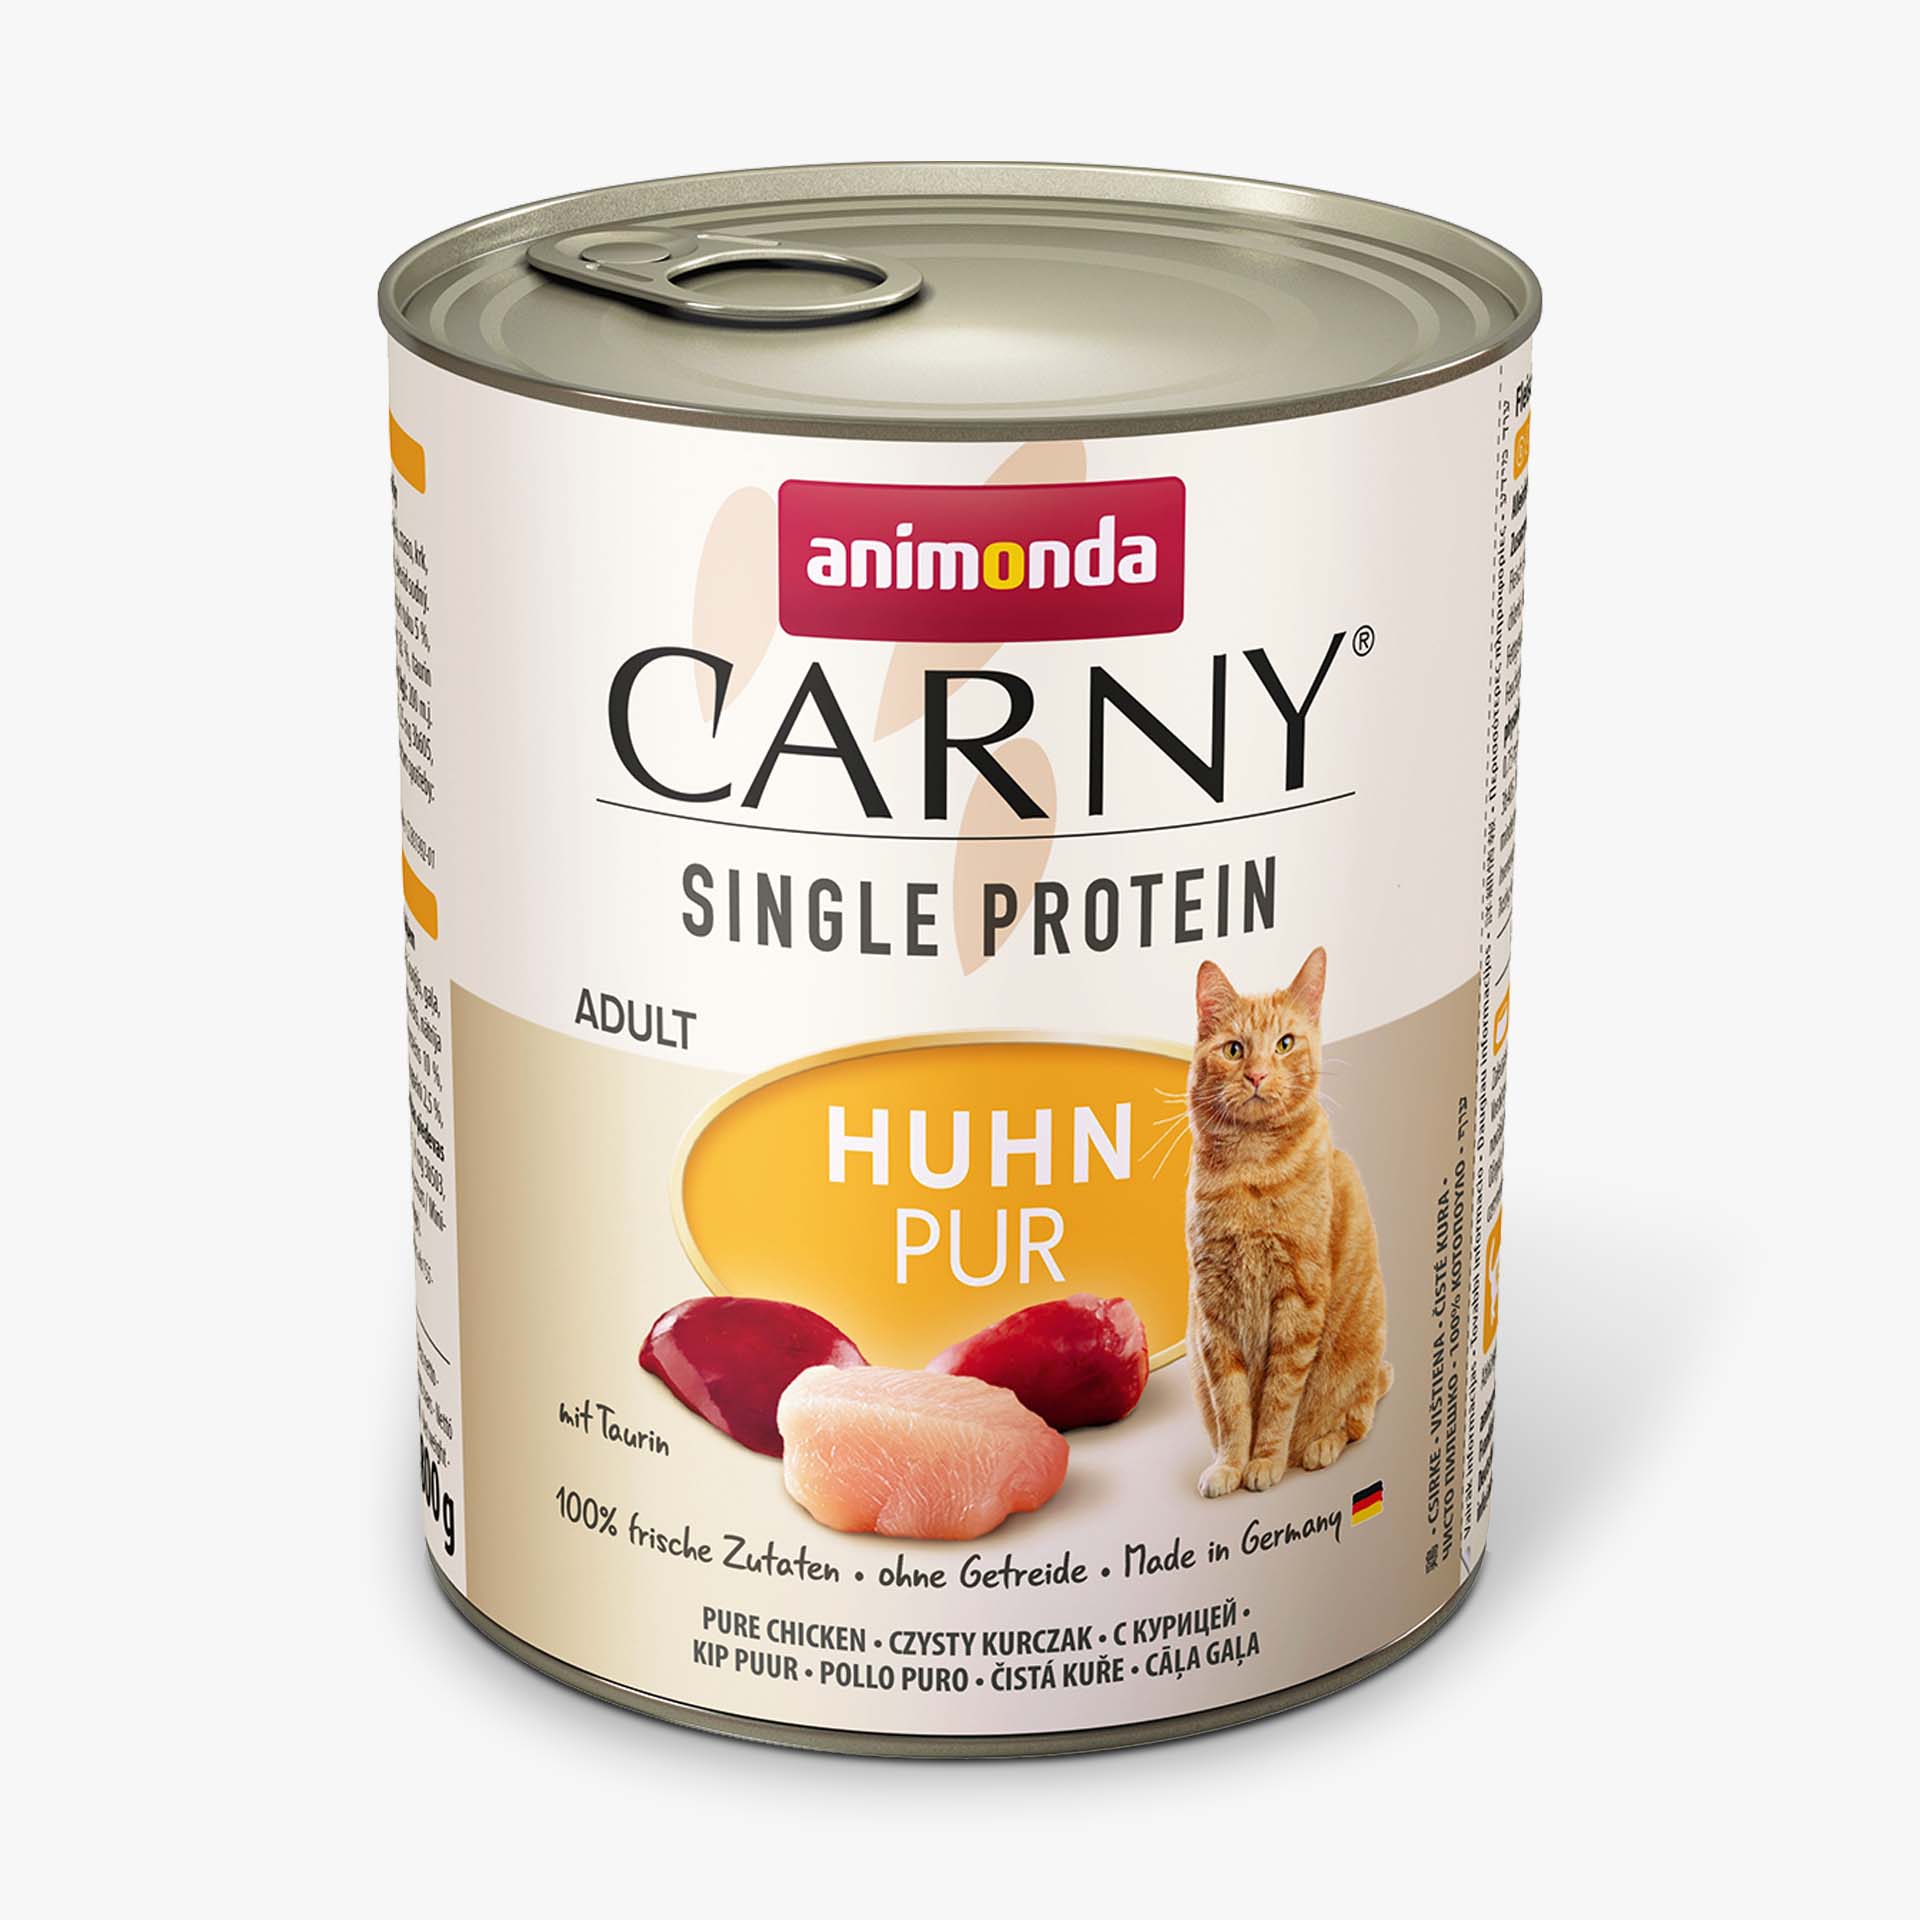 Carny Adult Single Protein Huhn pur